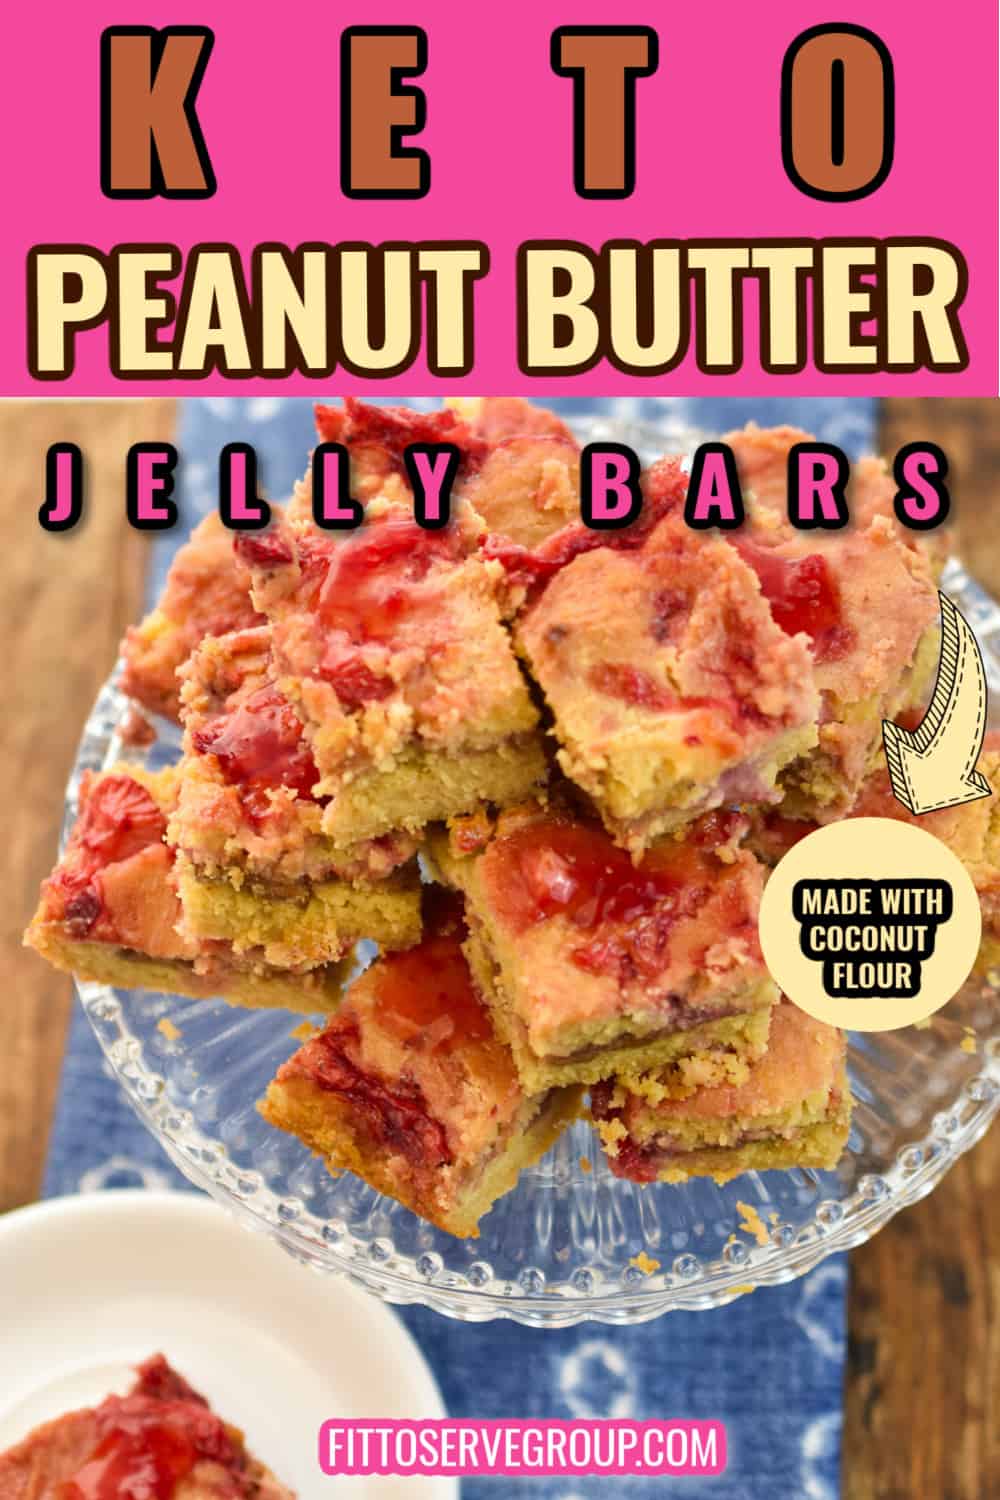 Keto Peanut Butter Jelly Bars on a clear cake stand